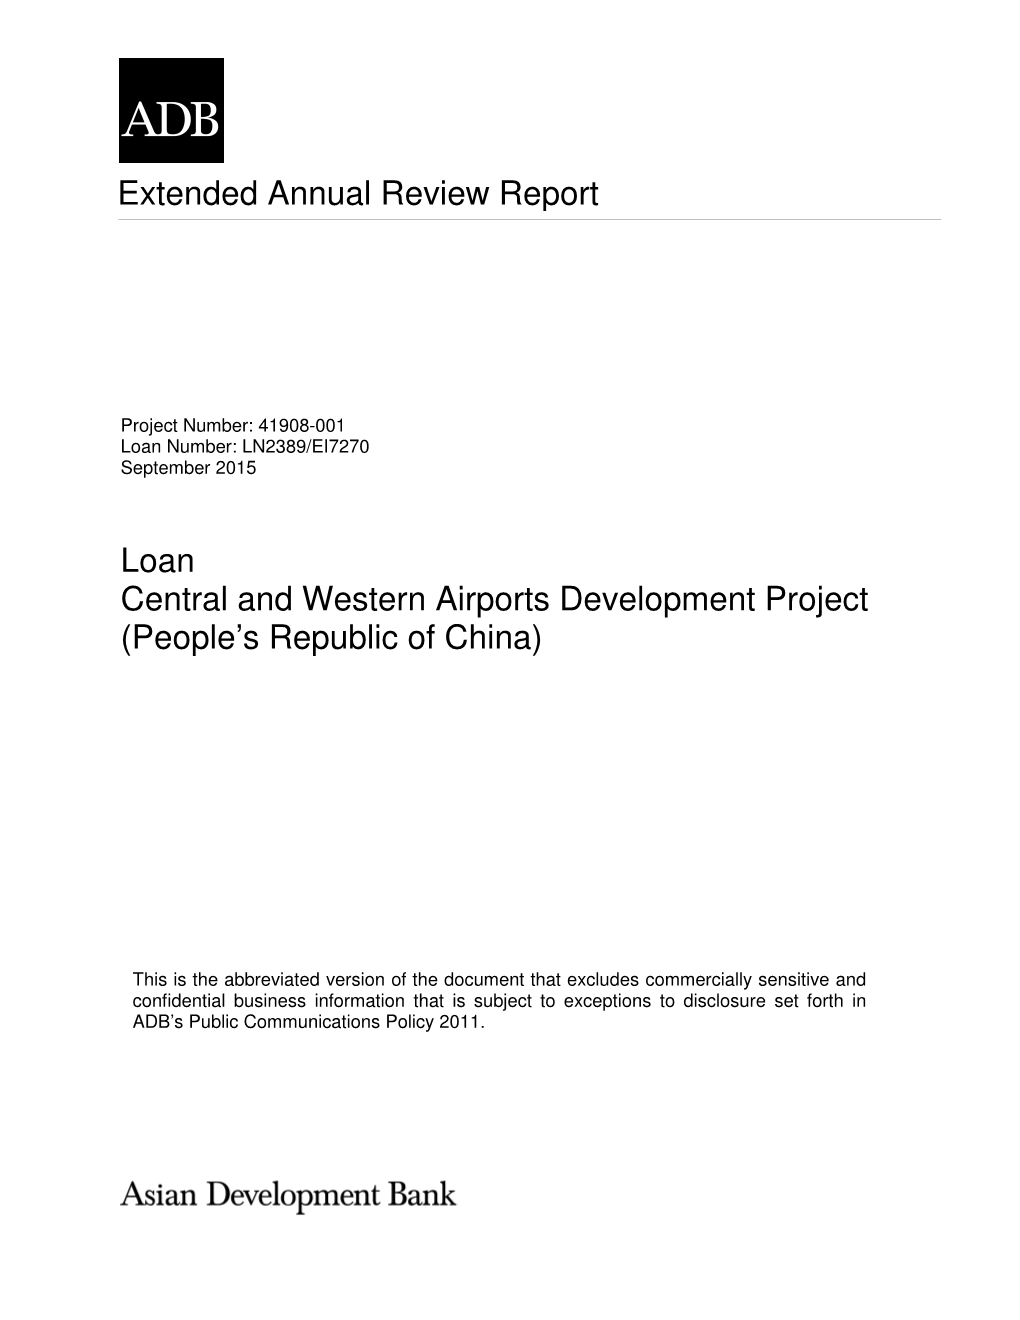 41908-014: Extended Annual Review Report